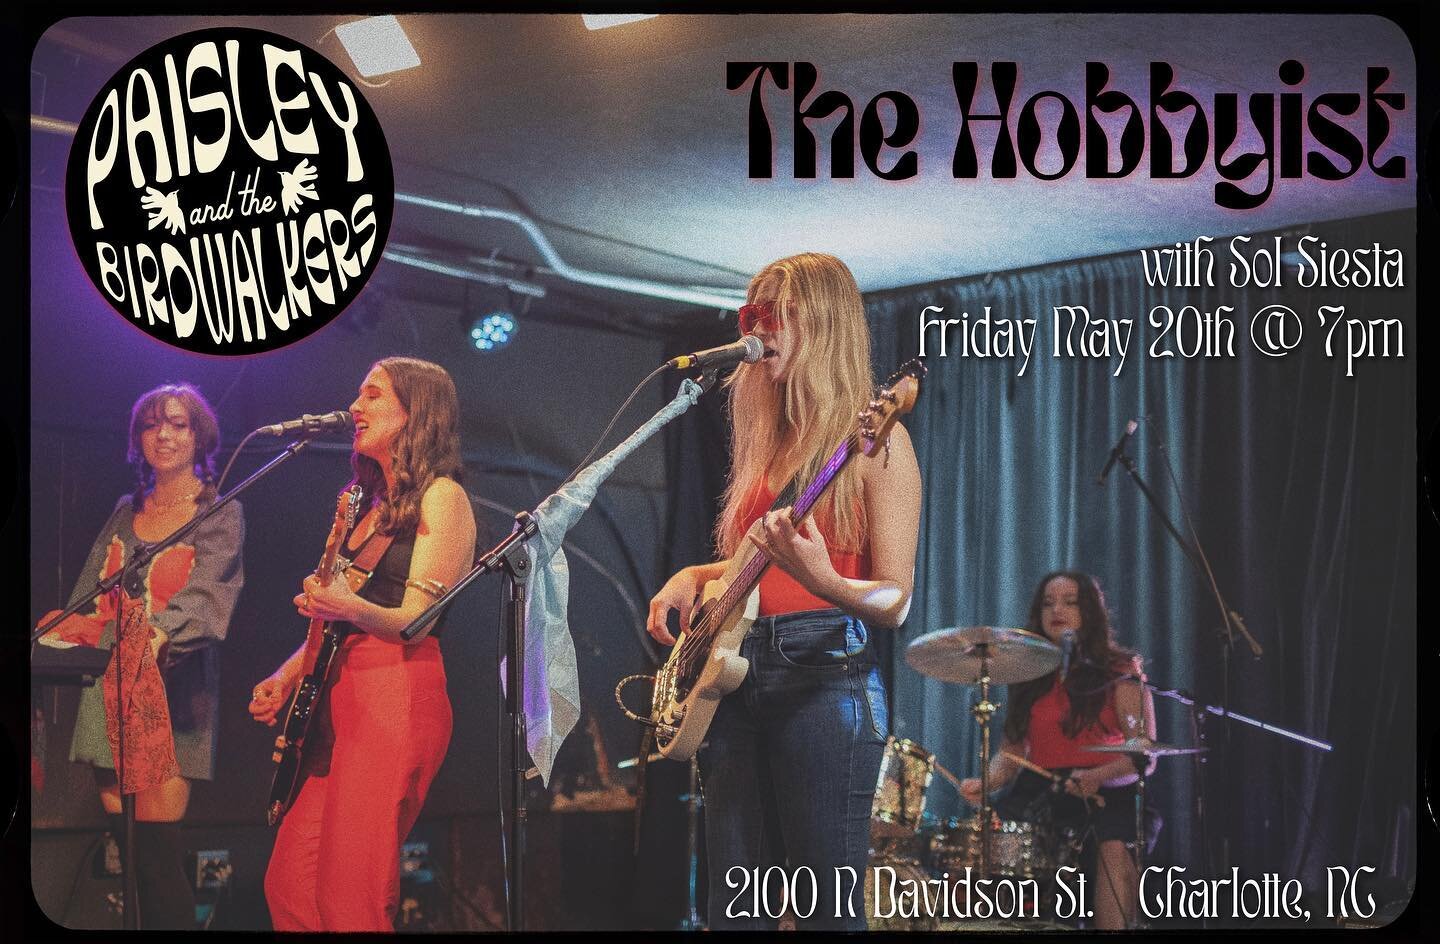 🌹CHARLOTTE!🌹We&rsquo;re headed up to play for you lovely folks on Friday May 20th at @thehobbyistclt with @solsiesta &hearts;️🌟🧚&zwj;♀️ 7-10pm! See y&rsquo;all there!